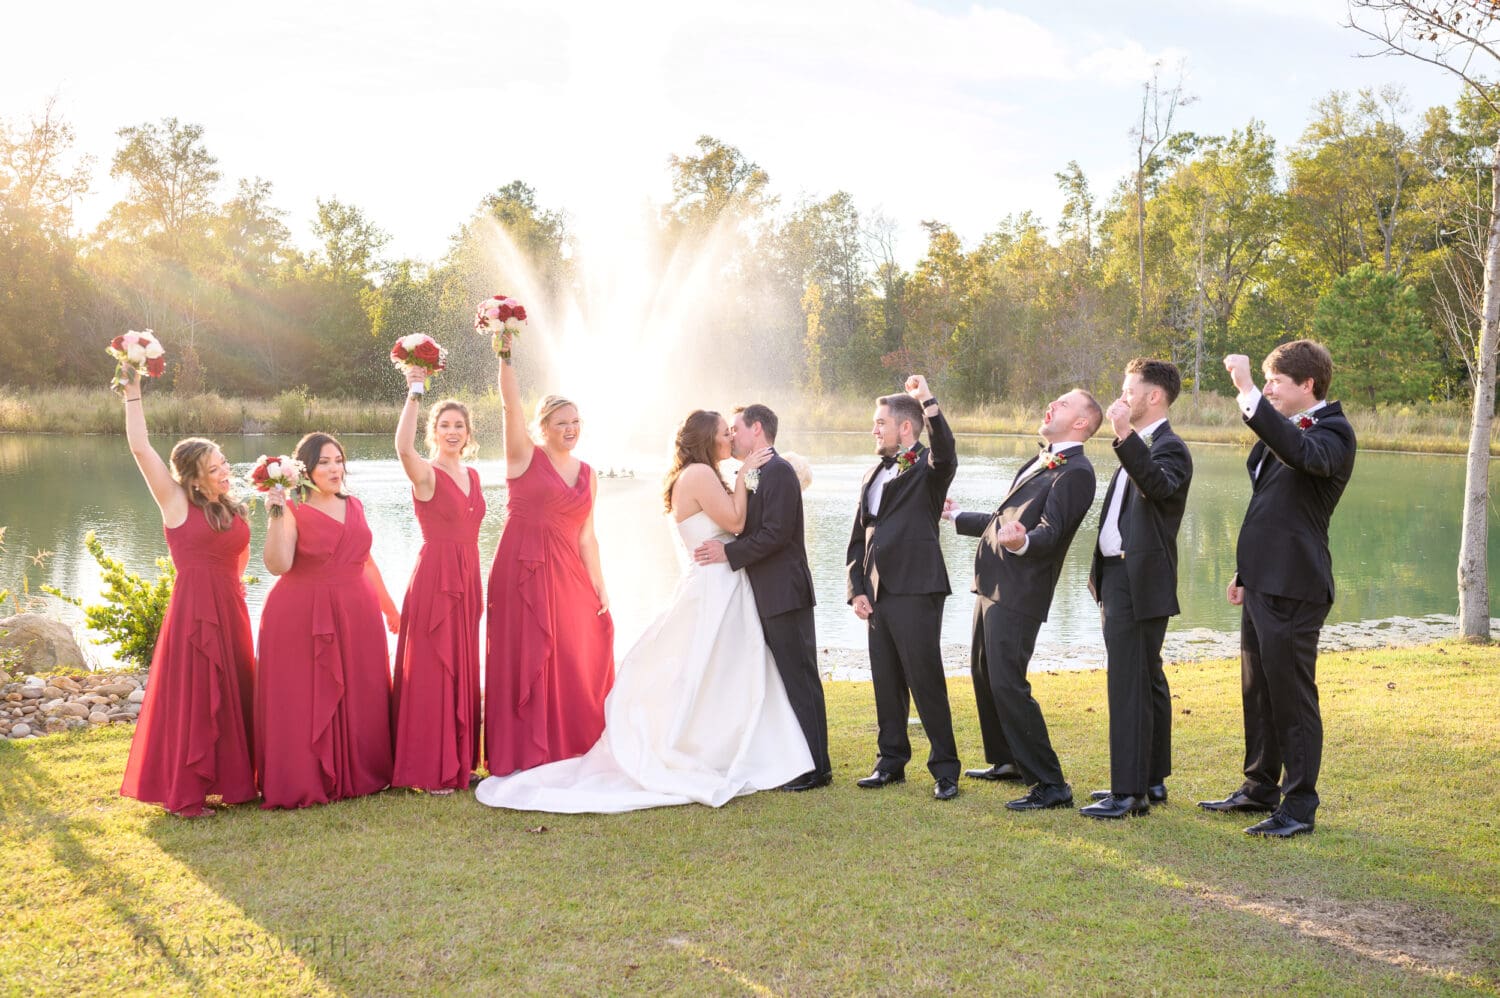 Kiss with the bridal party cheering - The Venue at White Oaks Farm